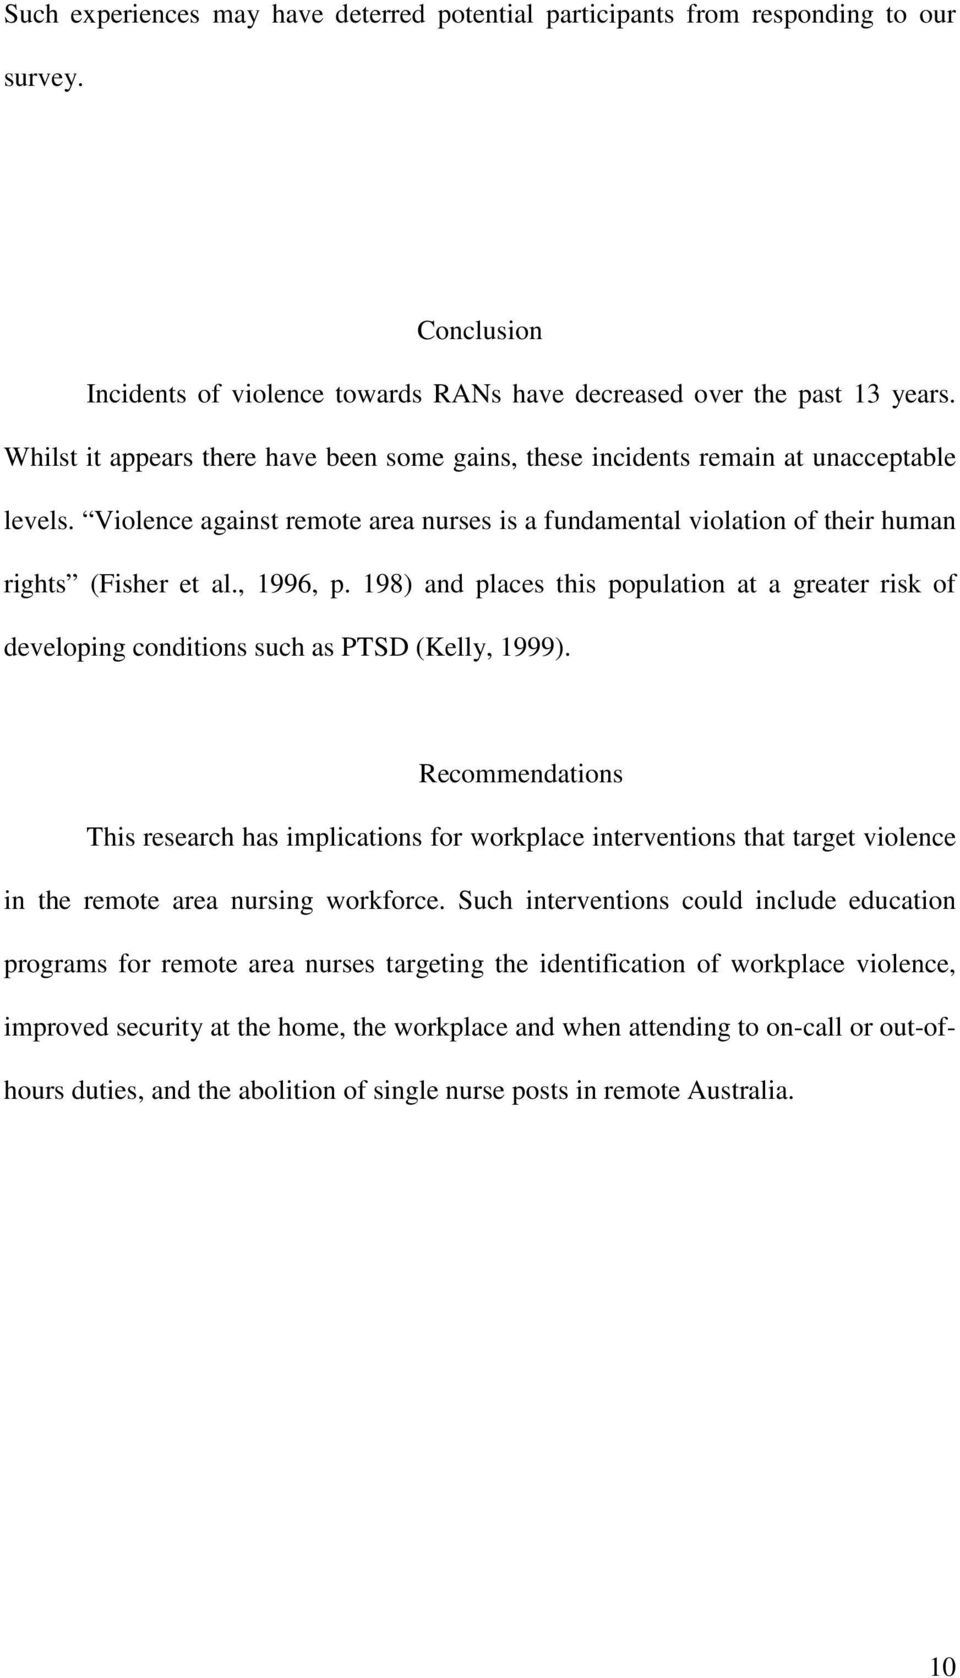 , 1996, p. 198) and places this population at a greater risk of developing conditions such as PTSD (Kelly, 1999).